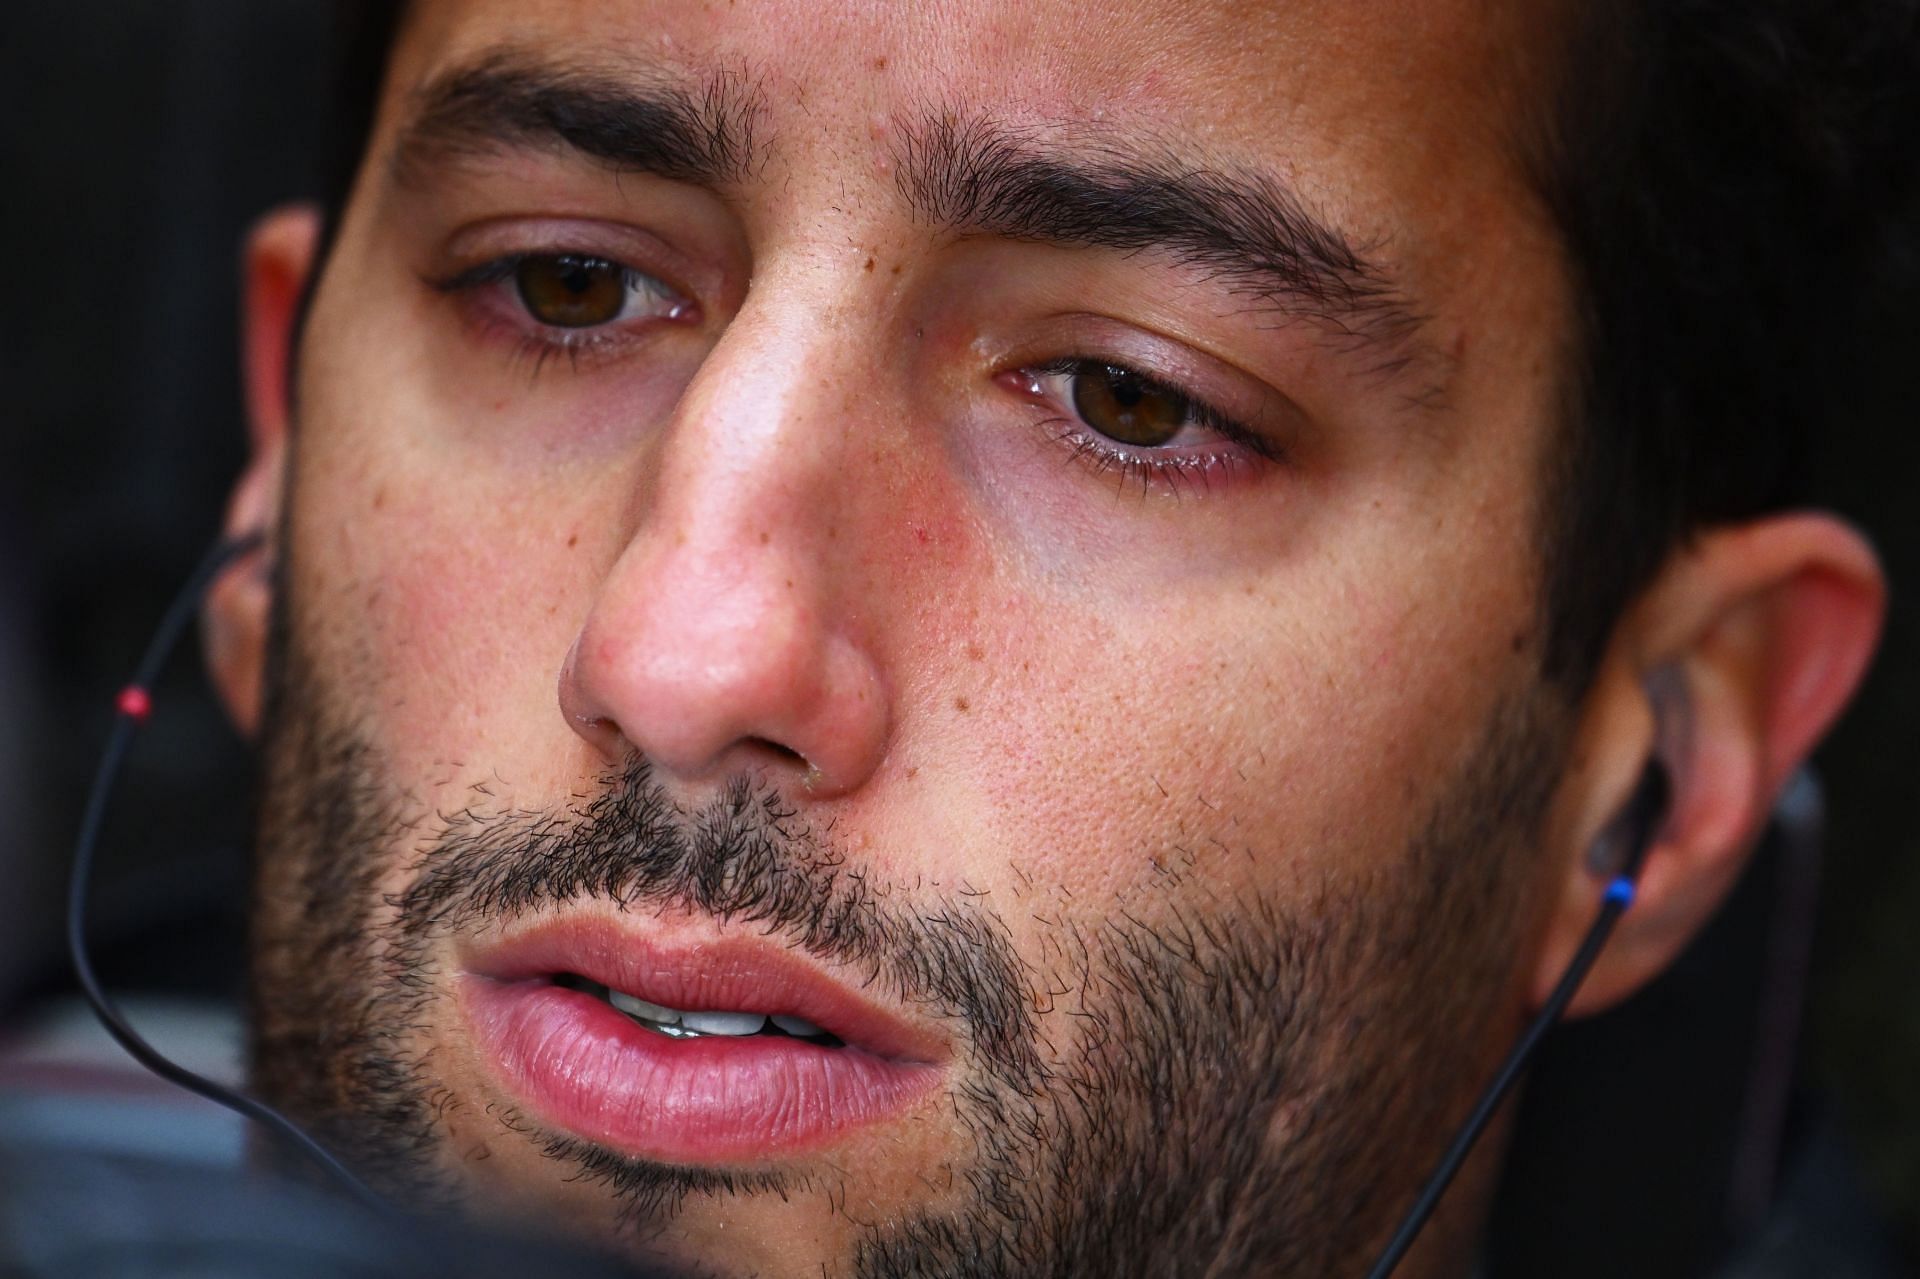 Daniel Ricciardo is expected to be released by McLaren at the end of the 2022 F1 season